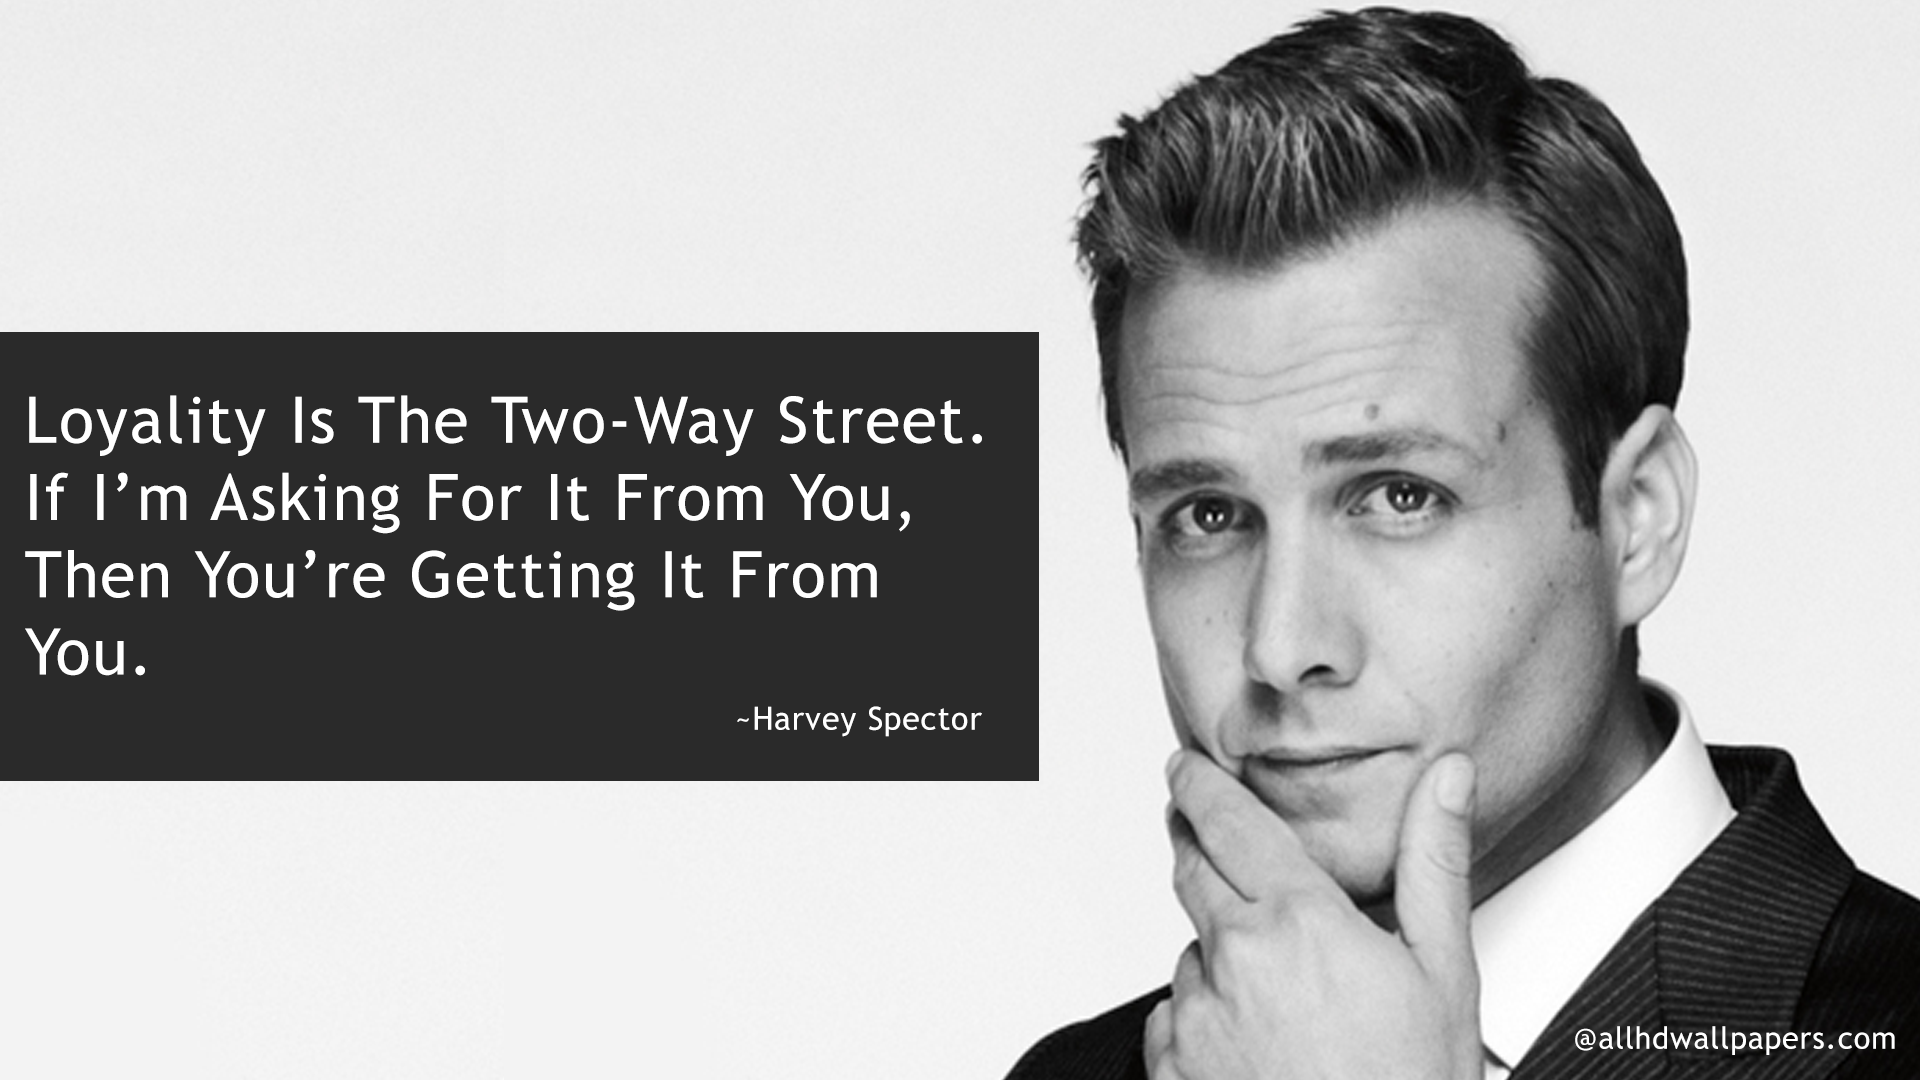 Best 65 Suits and Harvey Specter Quotes  NSF  Magazine